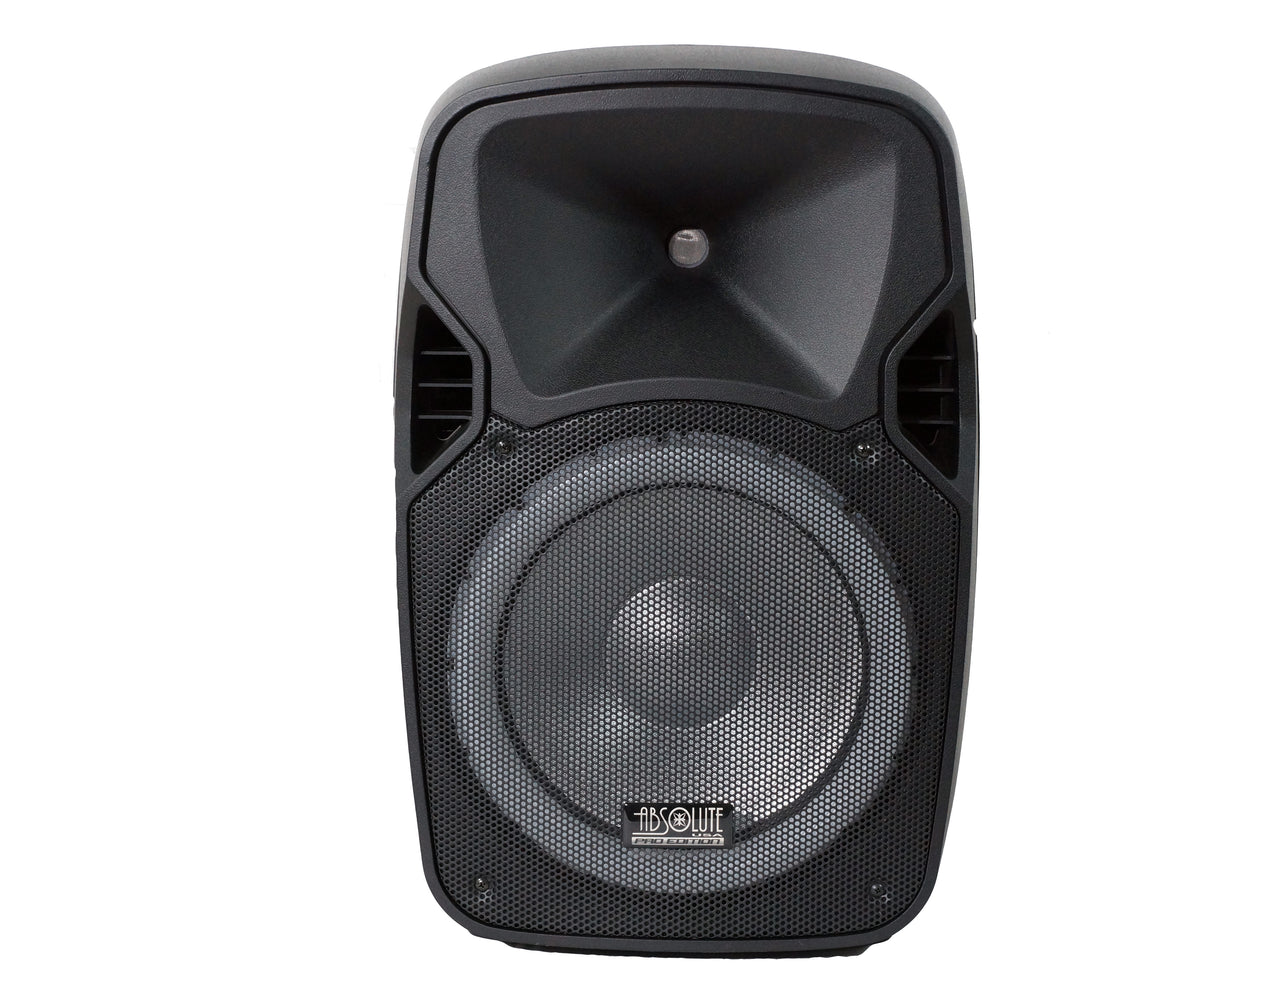 USPROBAT12 12" Wireless Portable PA Speaker System 3000W Powered Bluetooth Indoor & Outdoor DJ Stereo Loudspeaker with USB SD MP3 AUX Input, Flashing Party Light & FM Radio